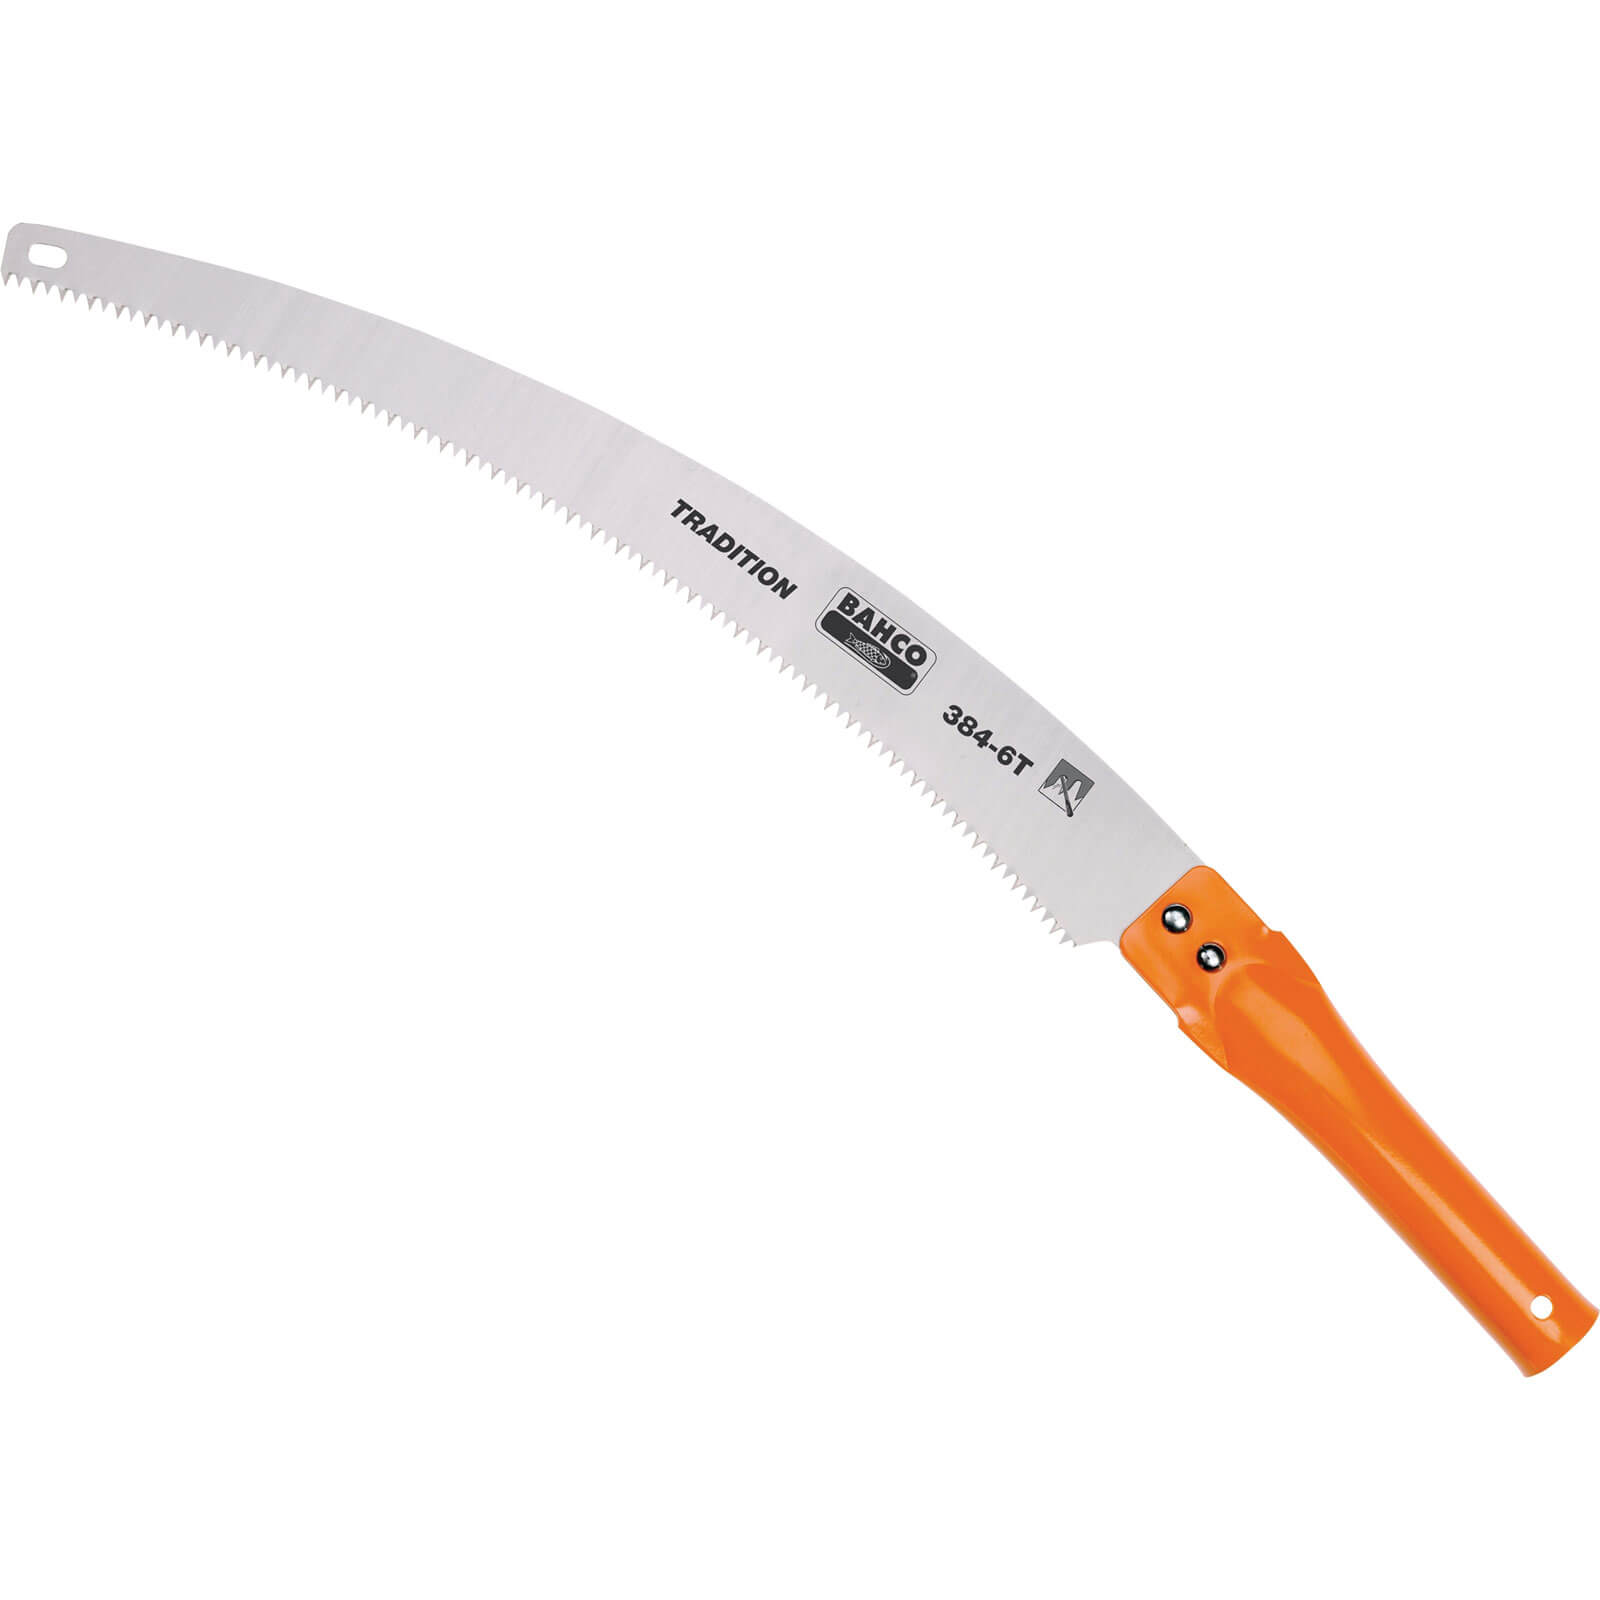 Bahco Pruning Saw 6tpi Can be used with 25mm Poles